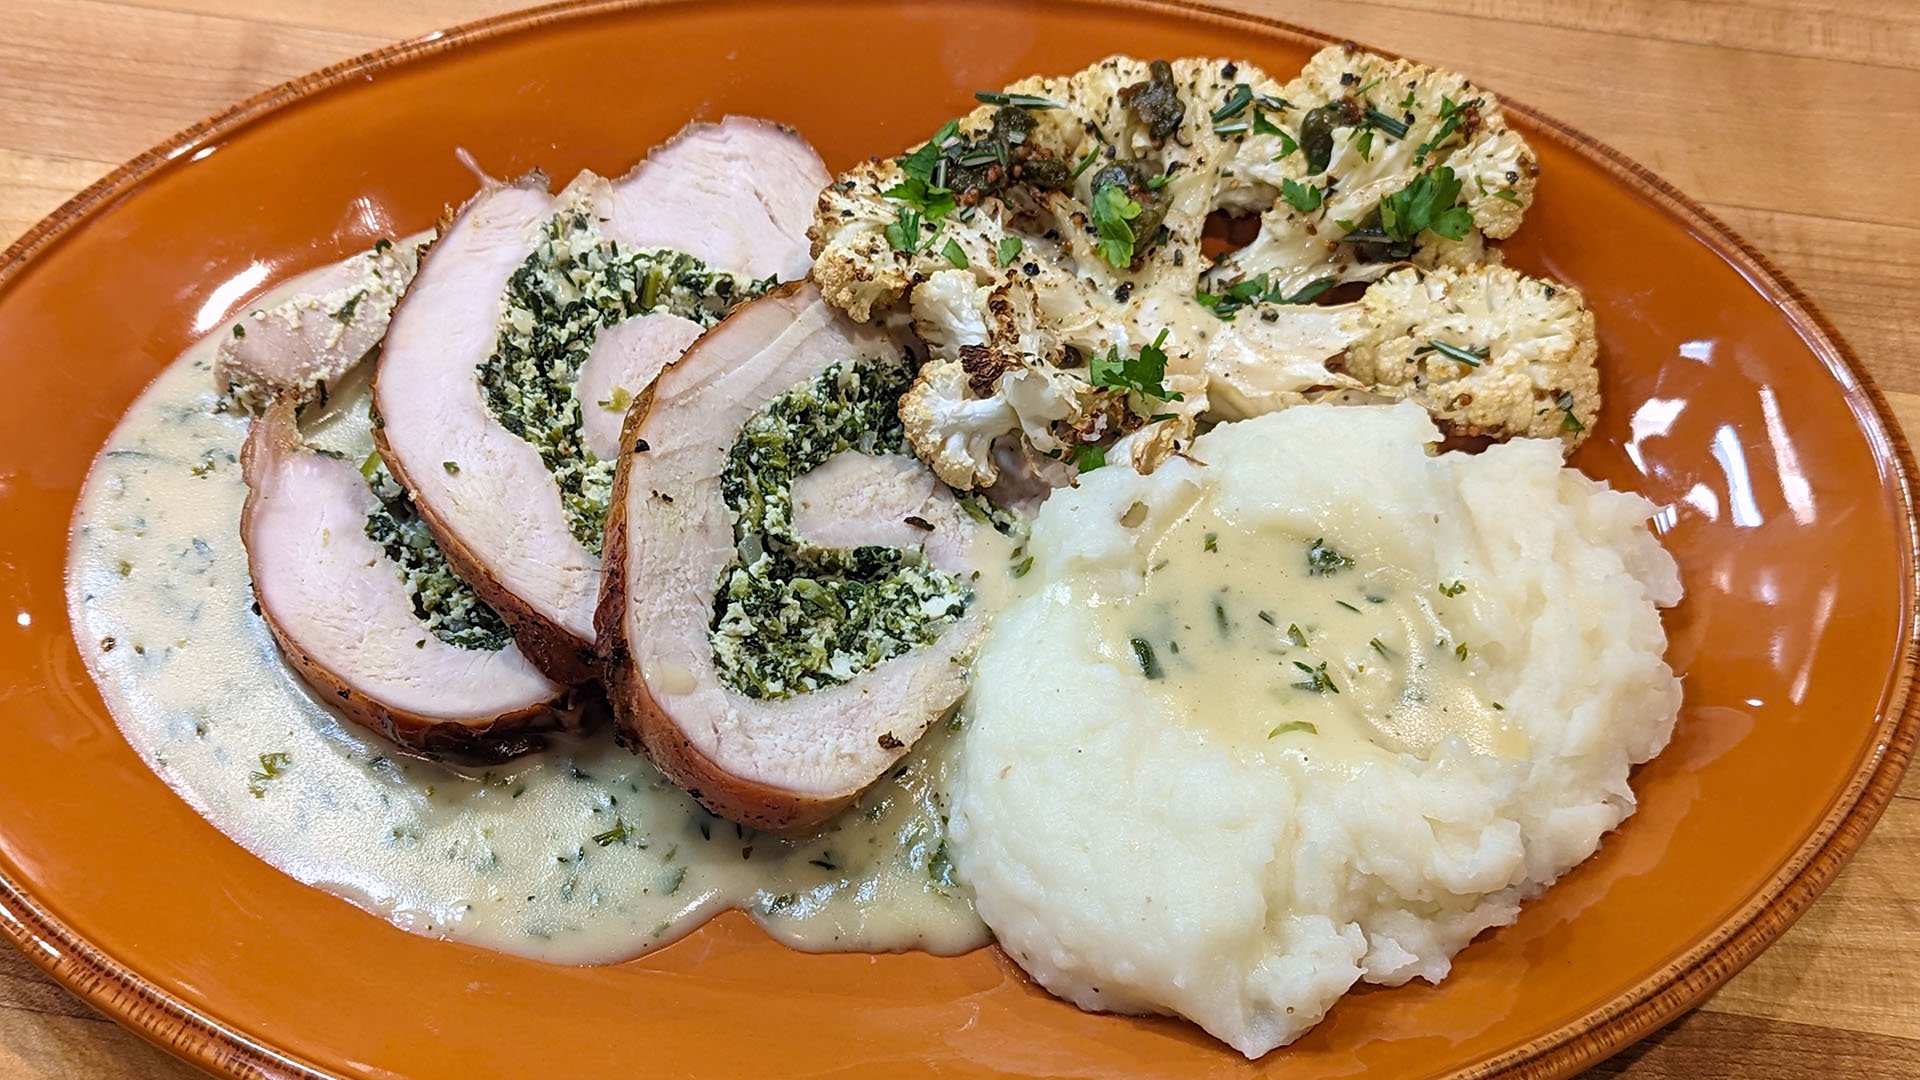 Italian Rolled Turkey Breast with Spinach & Ricotta and Herb Gravy